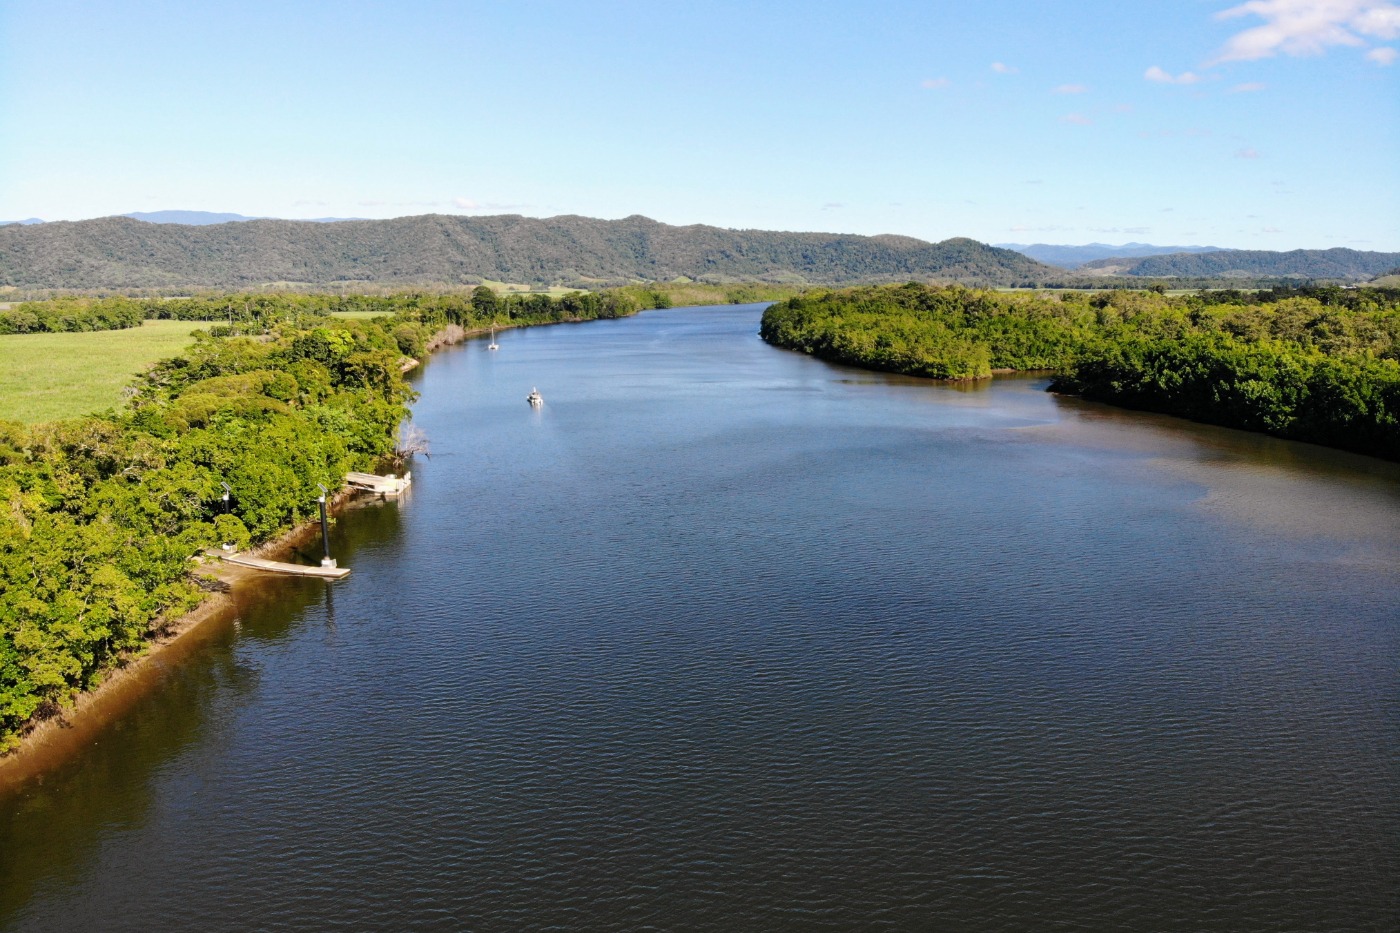 The Daintree River drone photo